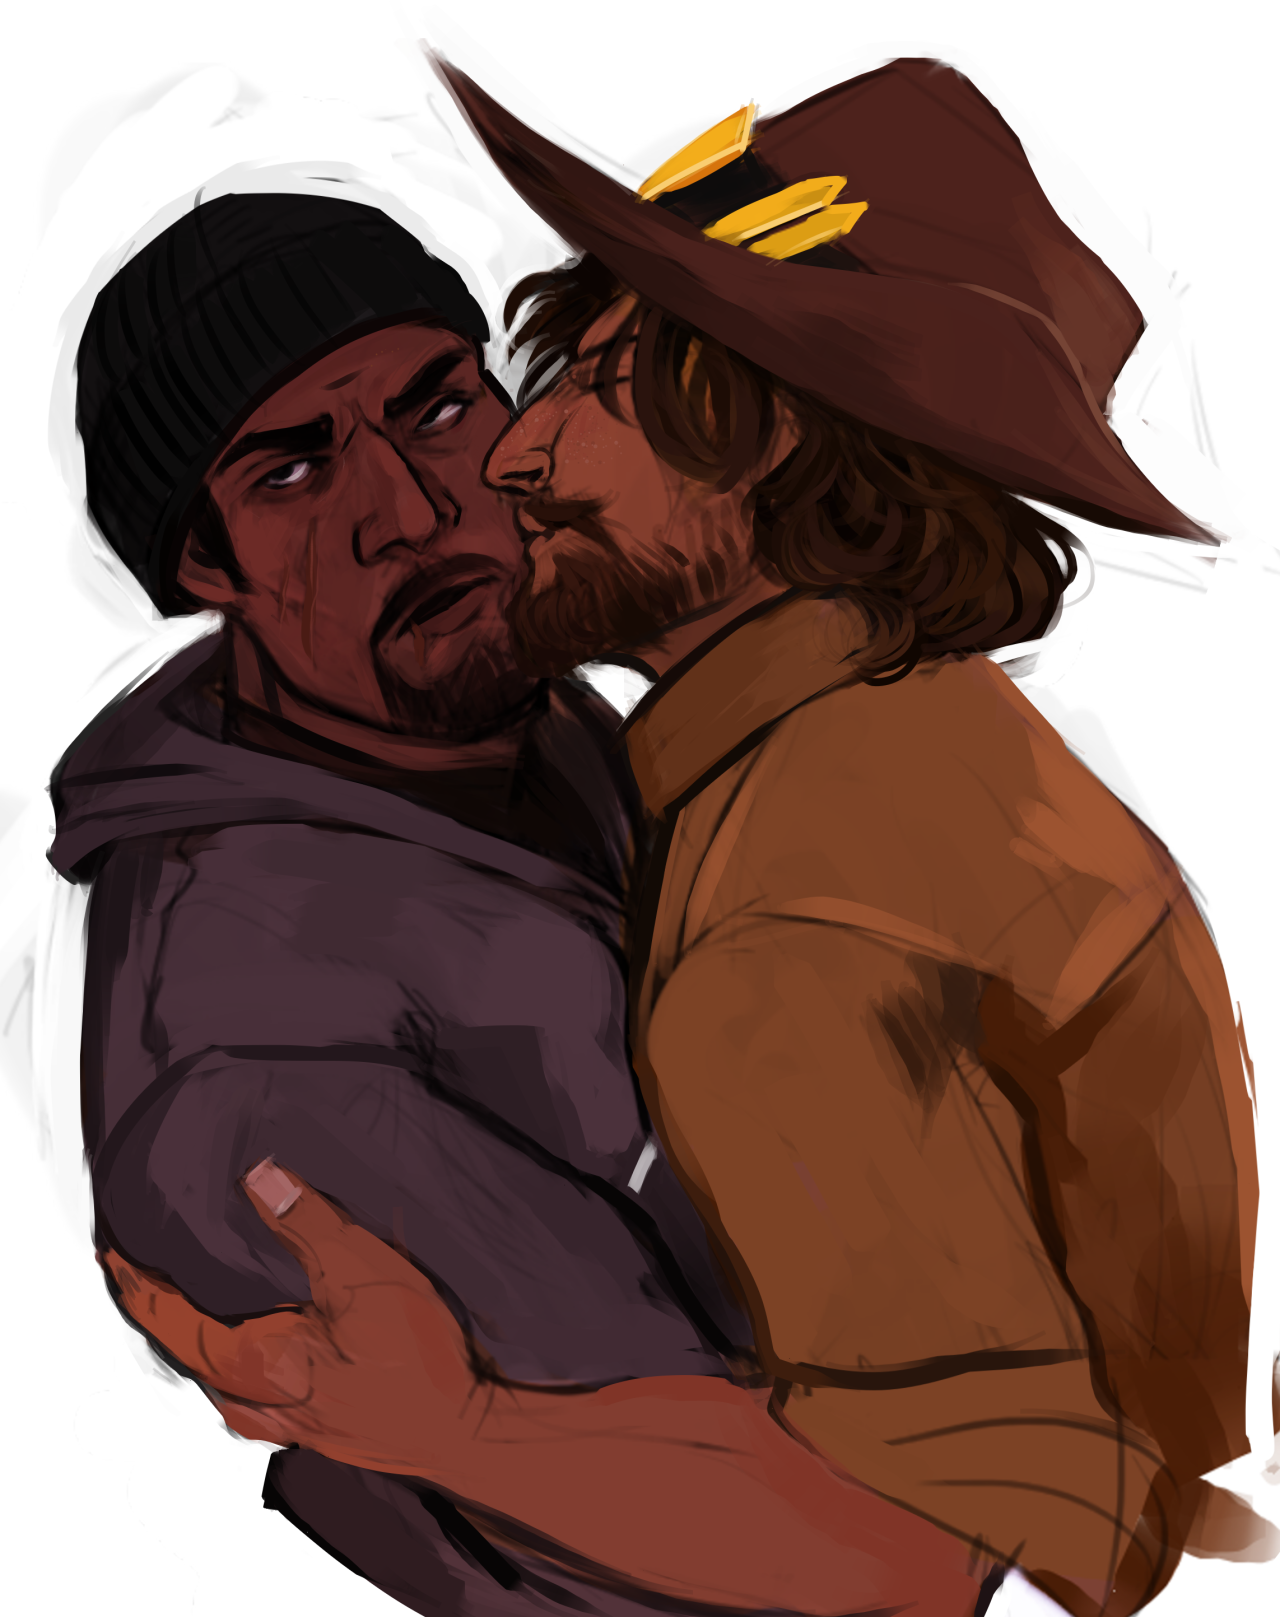 I really wish there was more McReaper, especially since McCree served under...